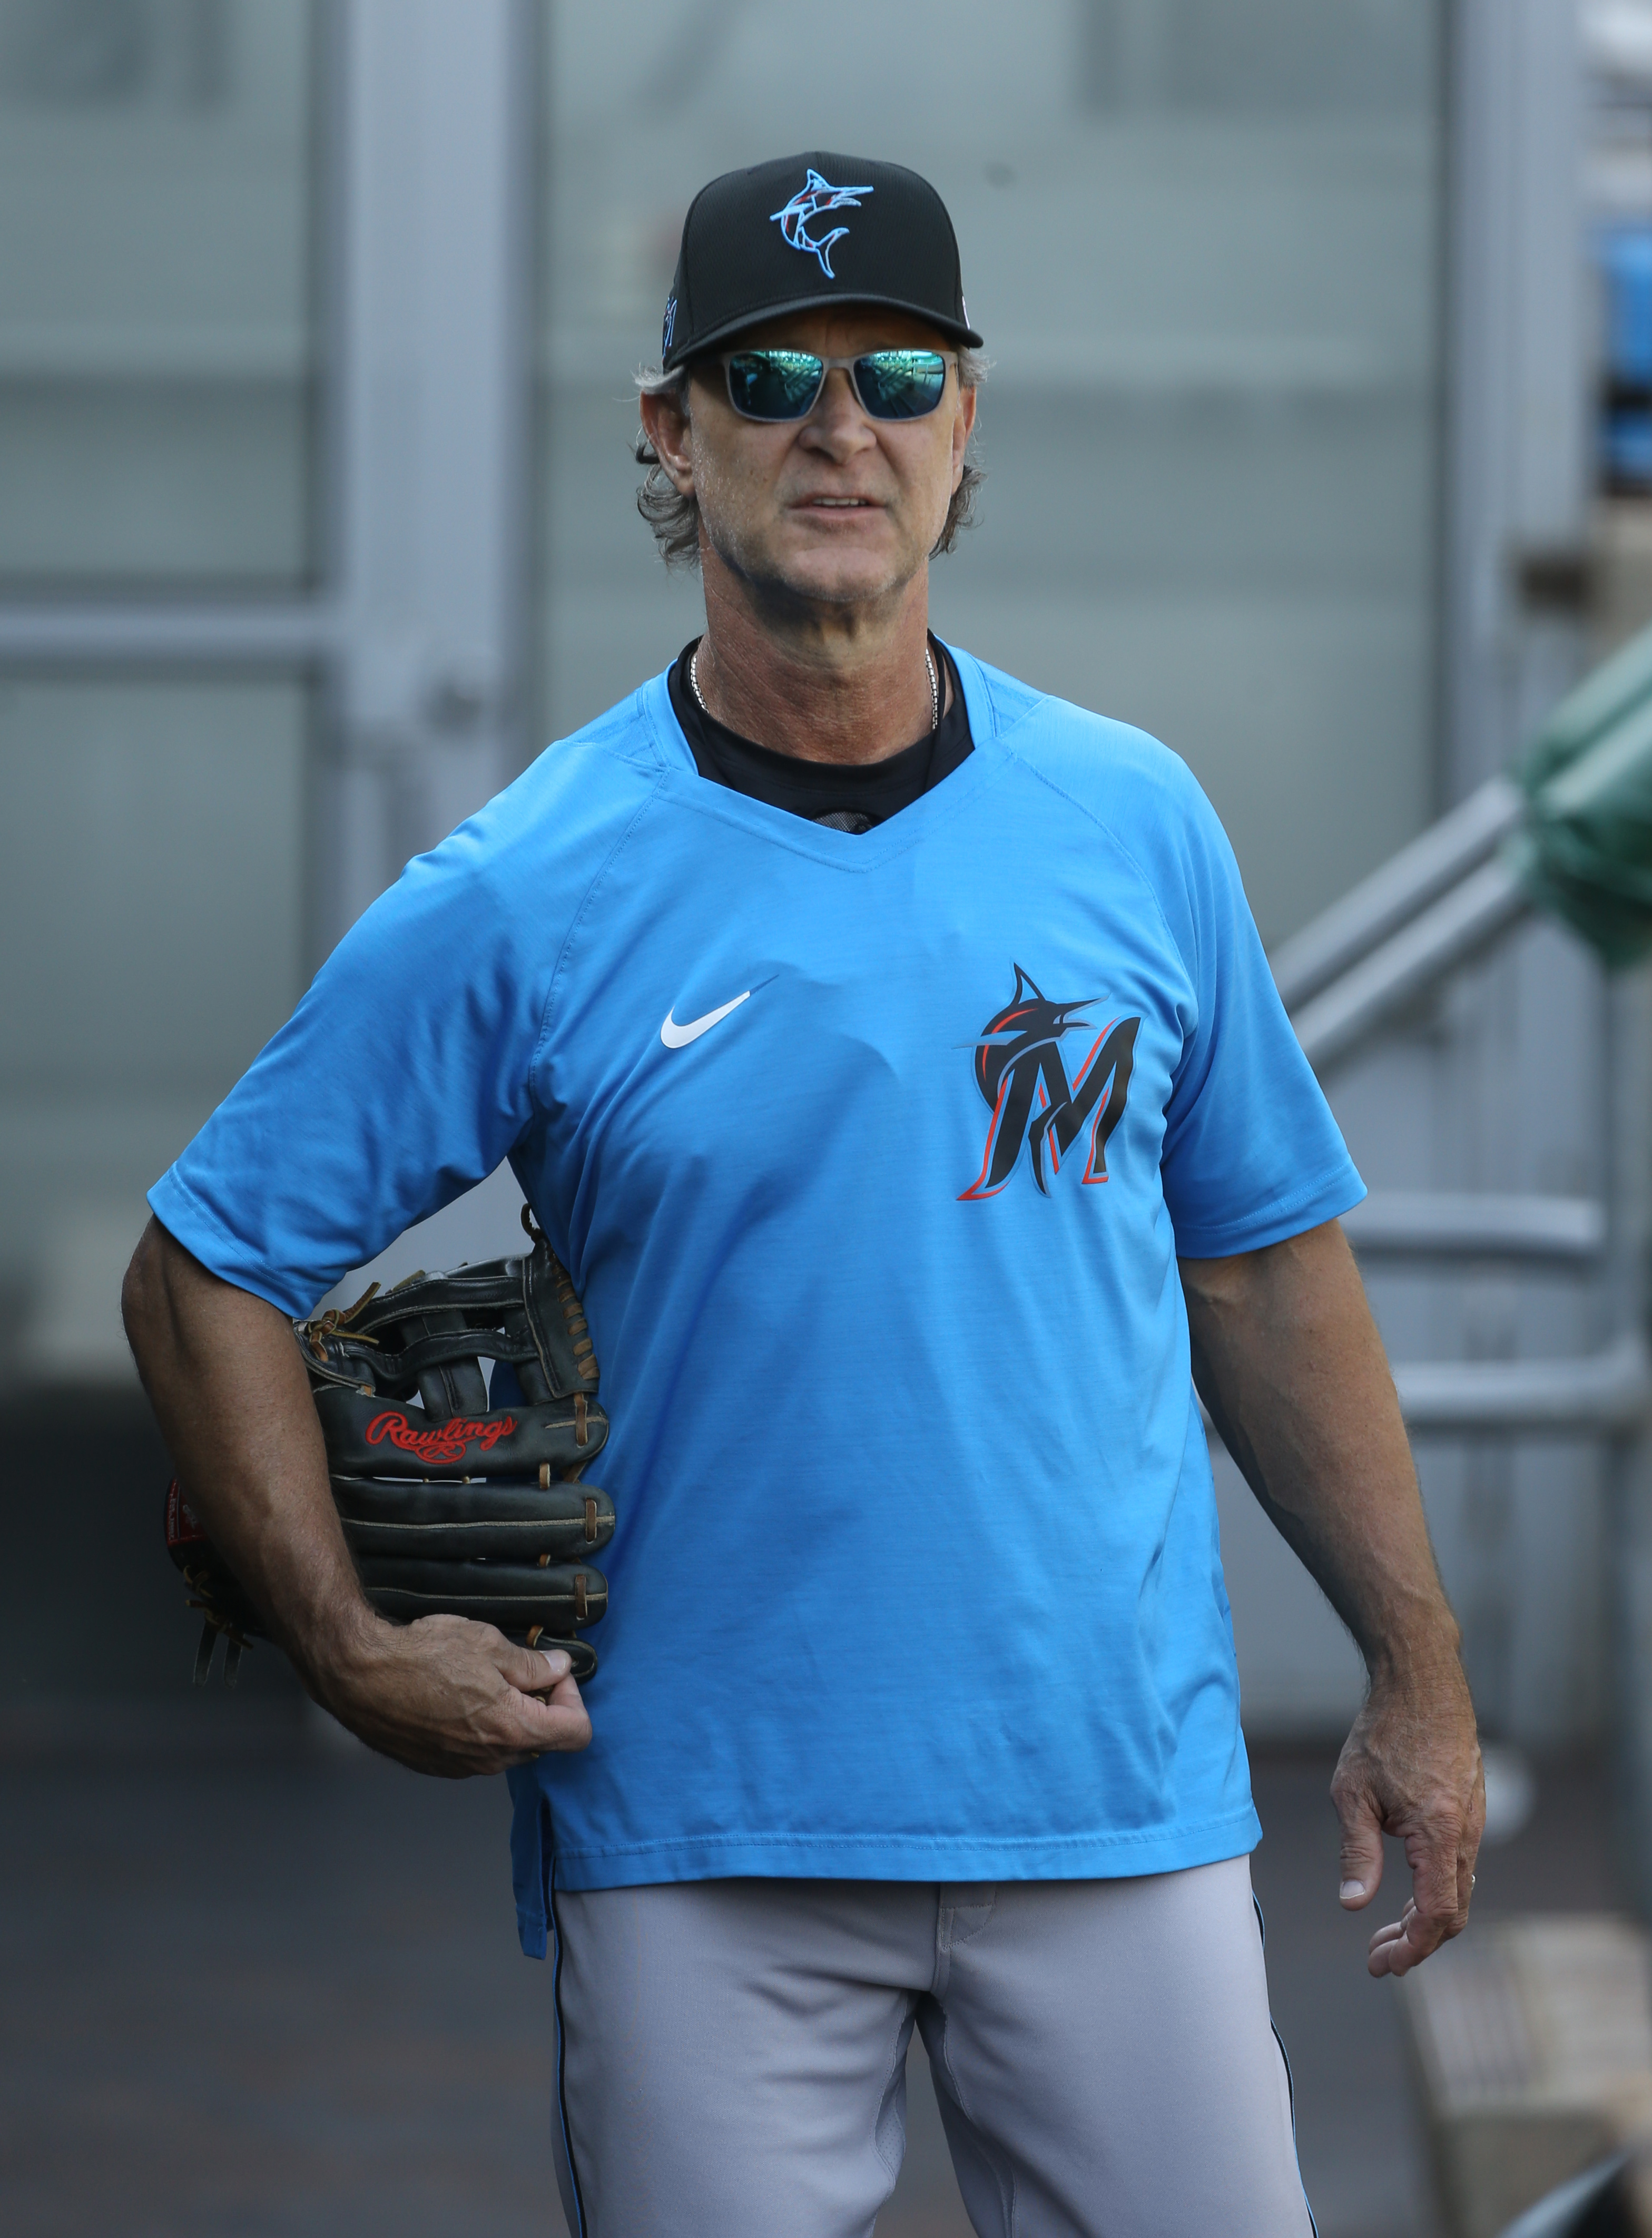 Don Mattingly on his way out as Marlins manager?